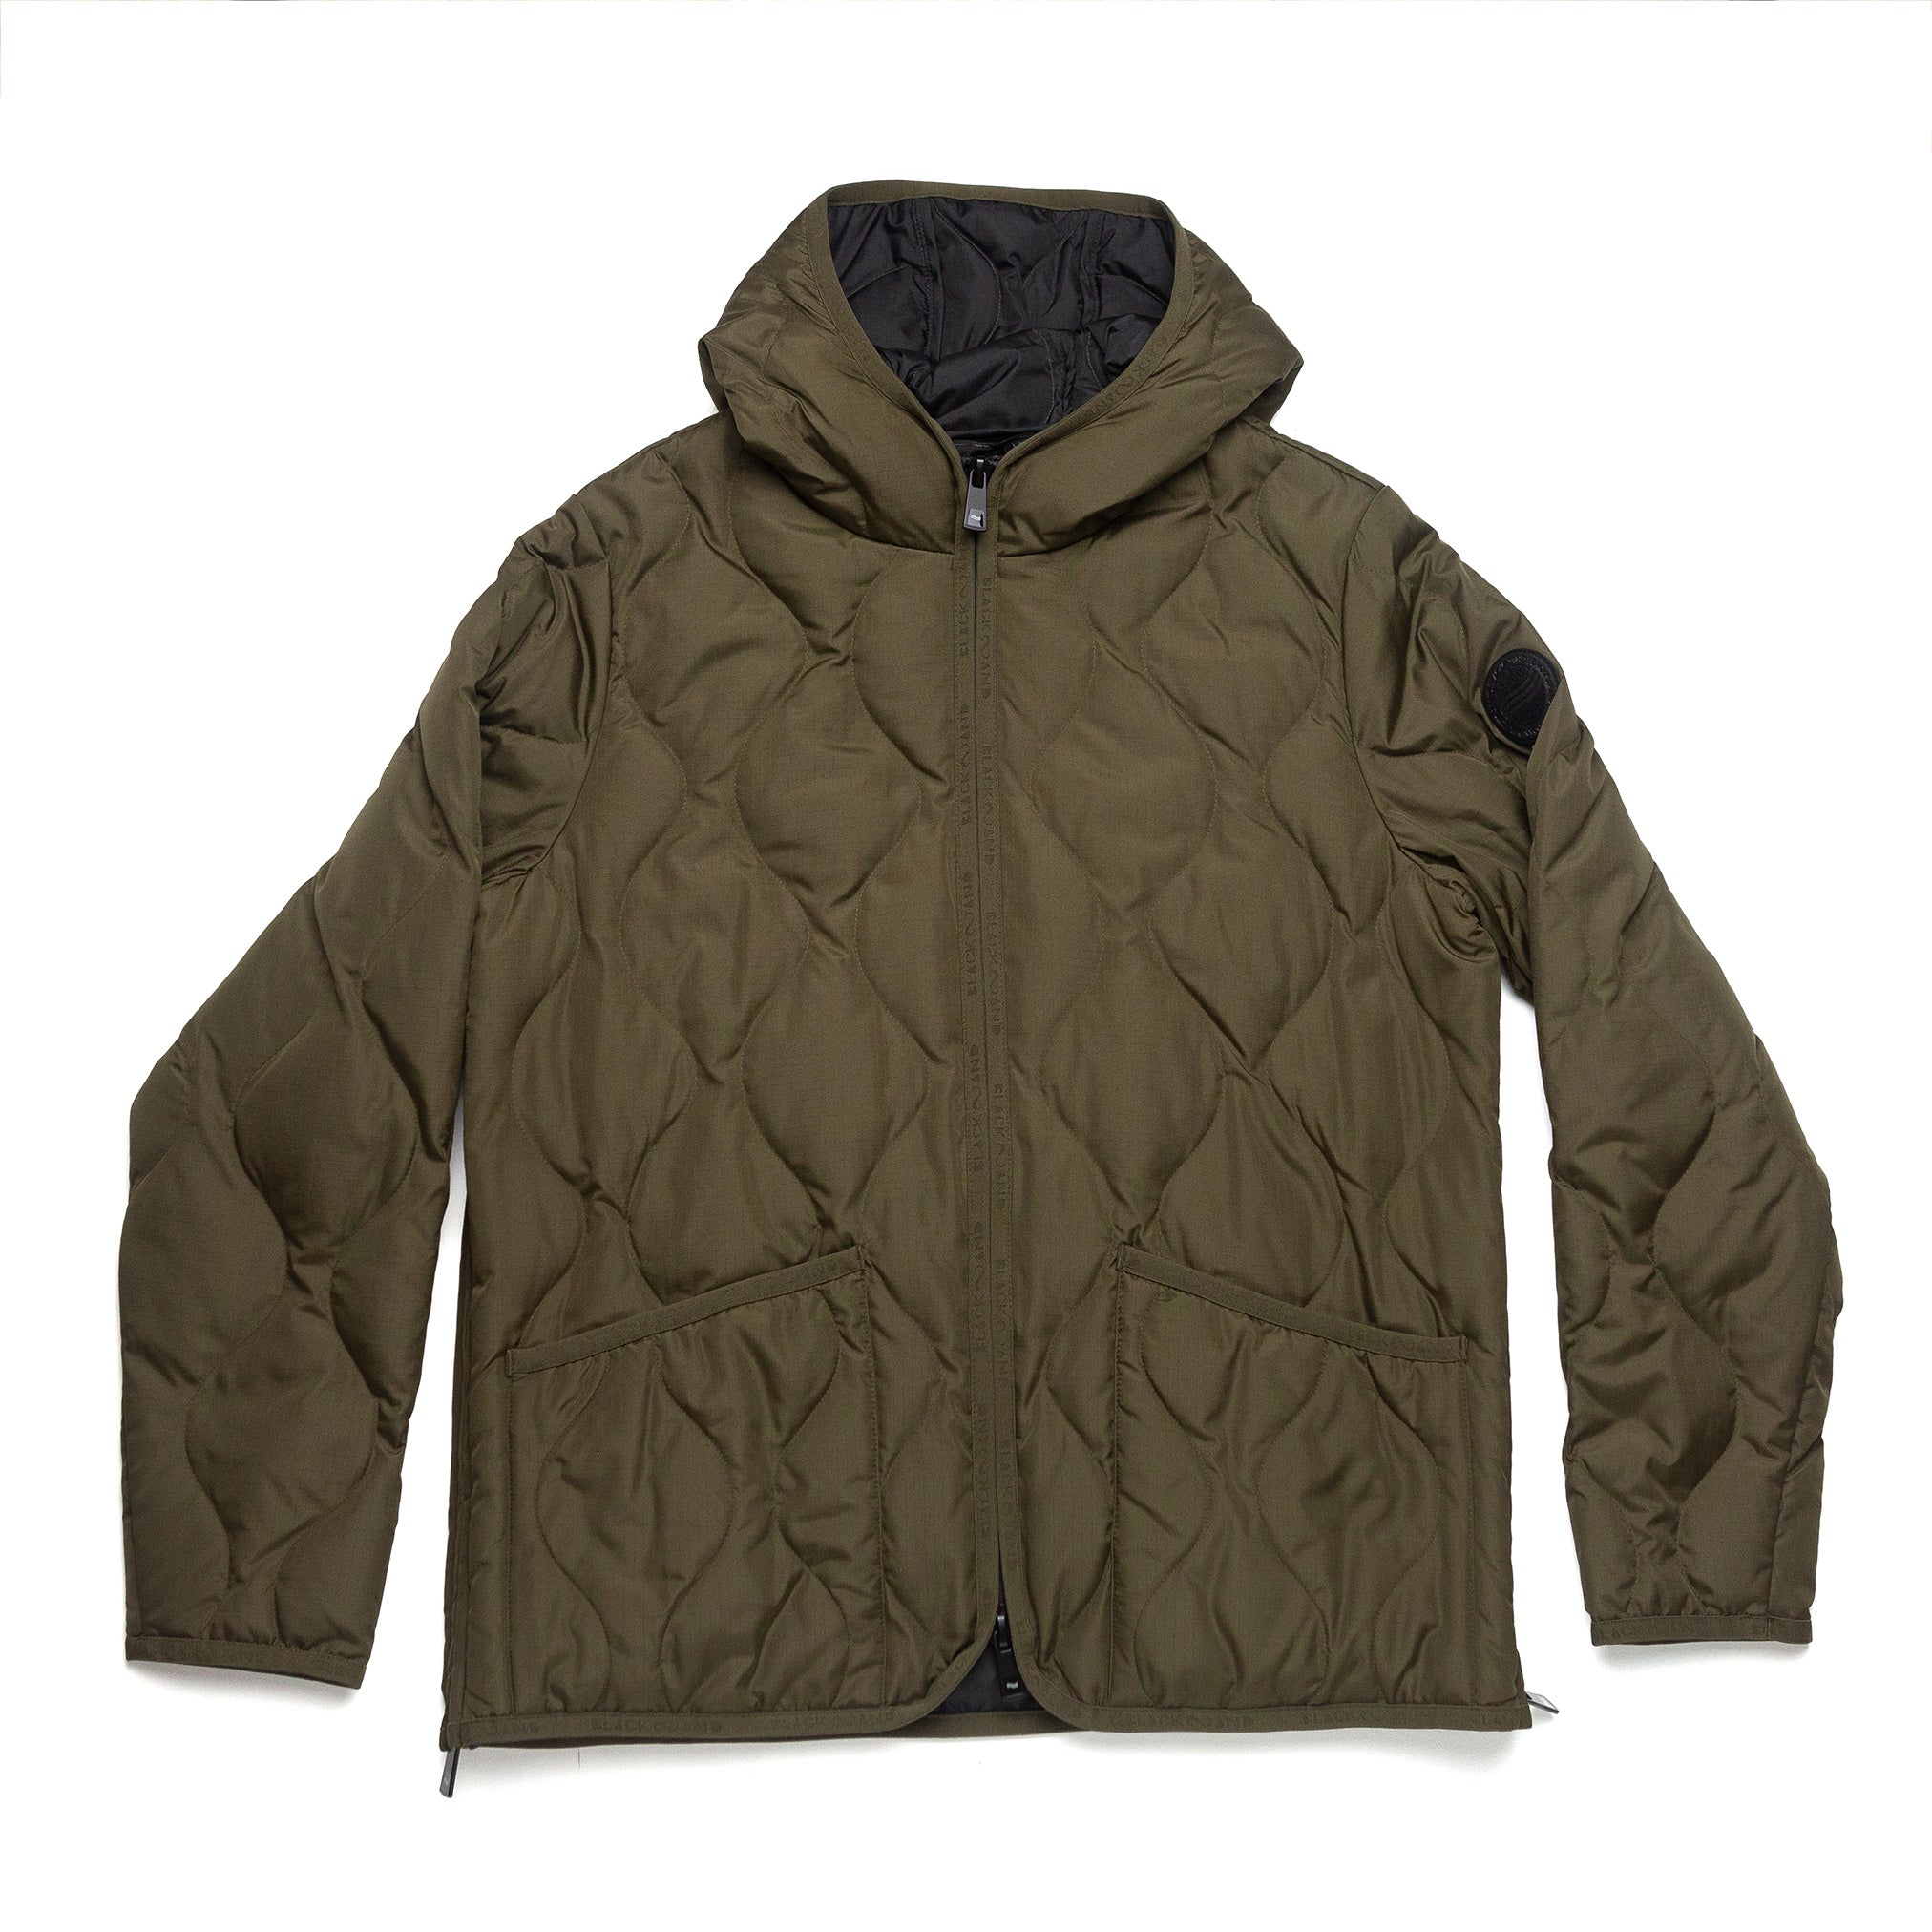 The Eir Jacket in Olive